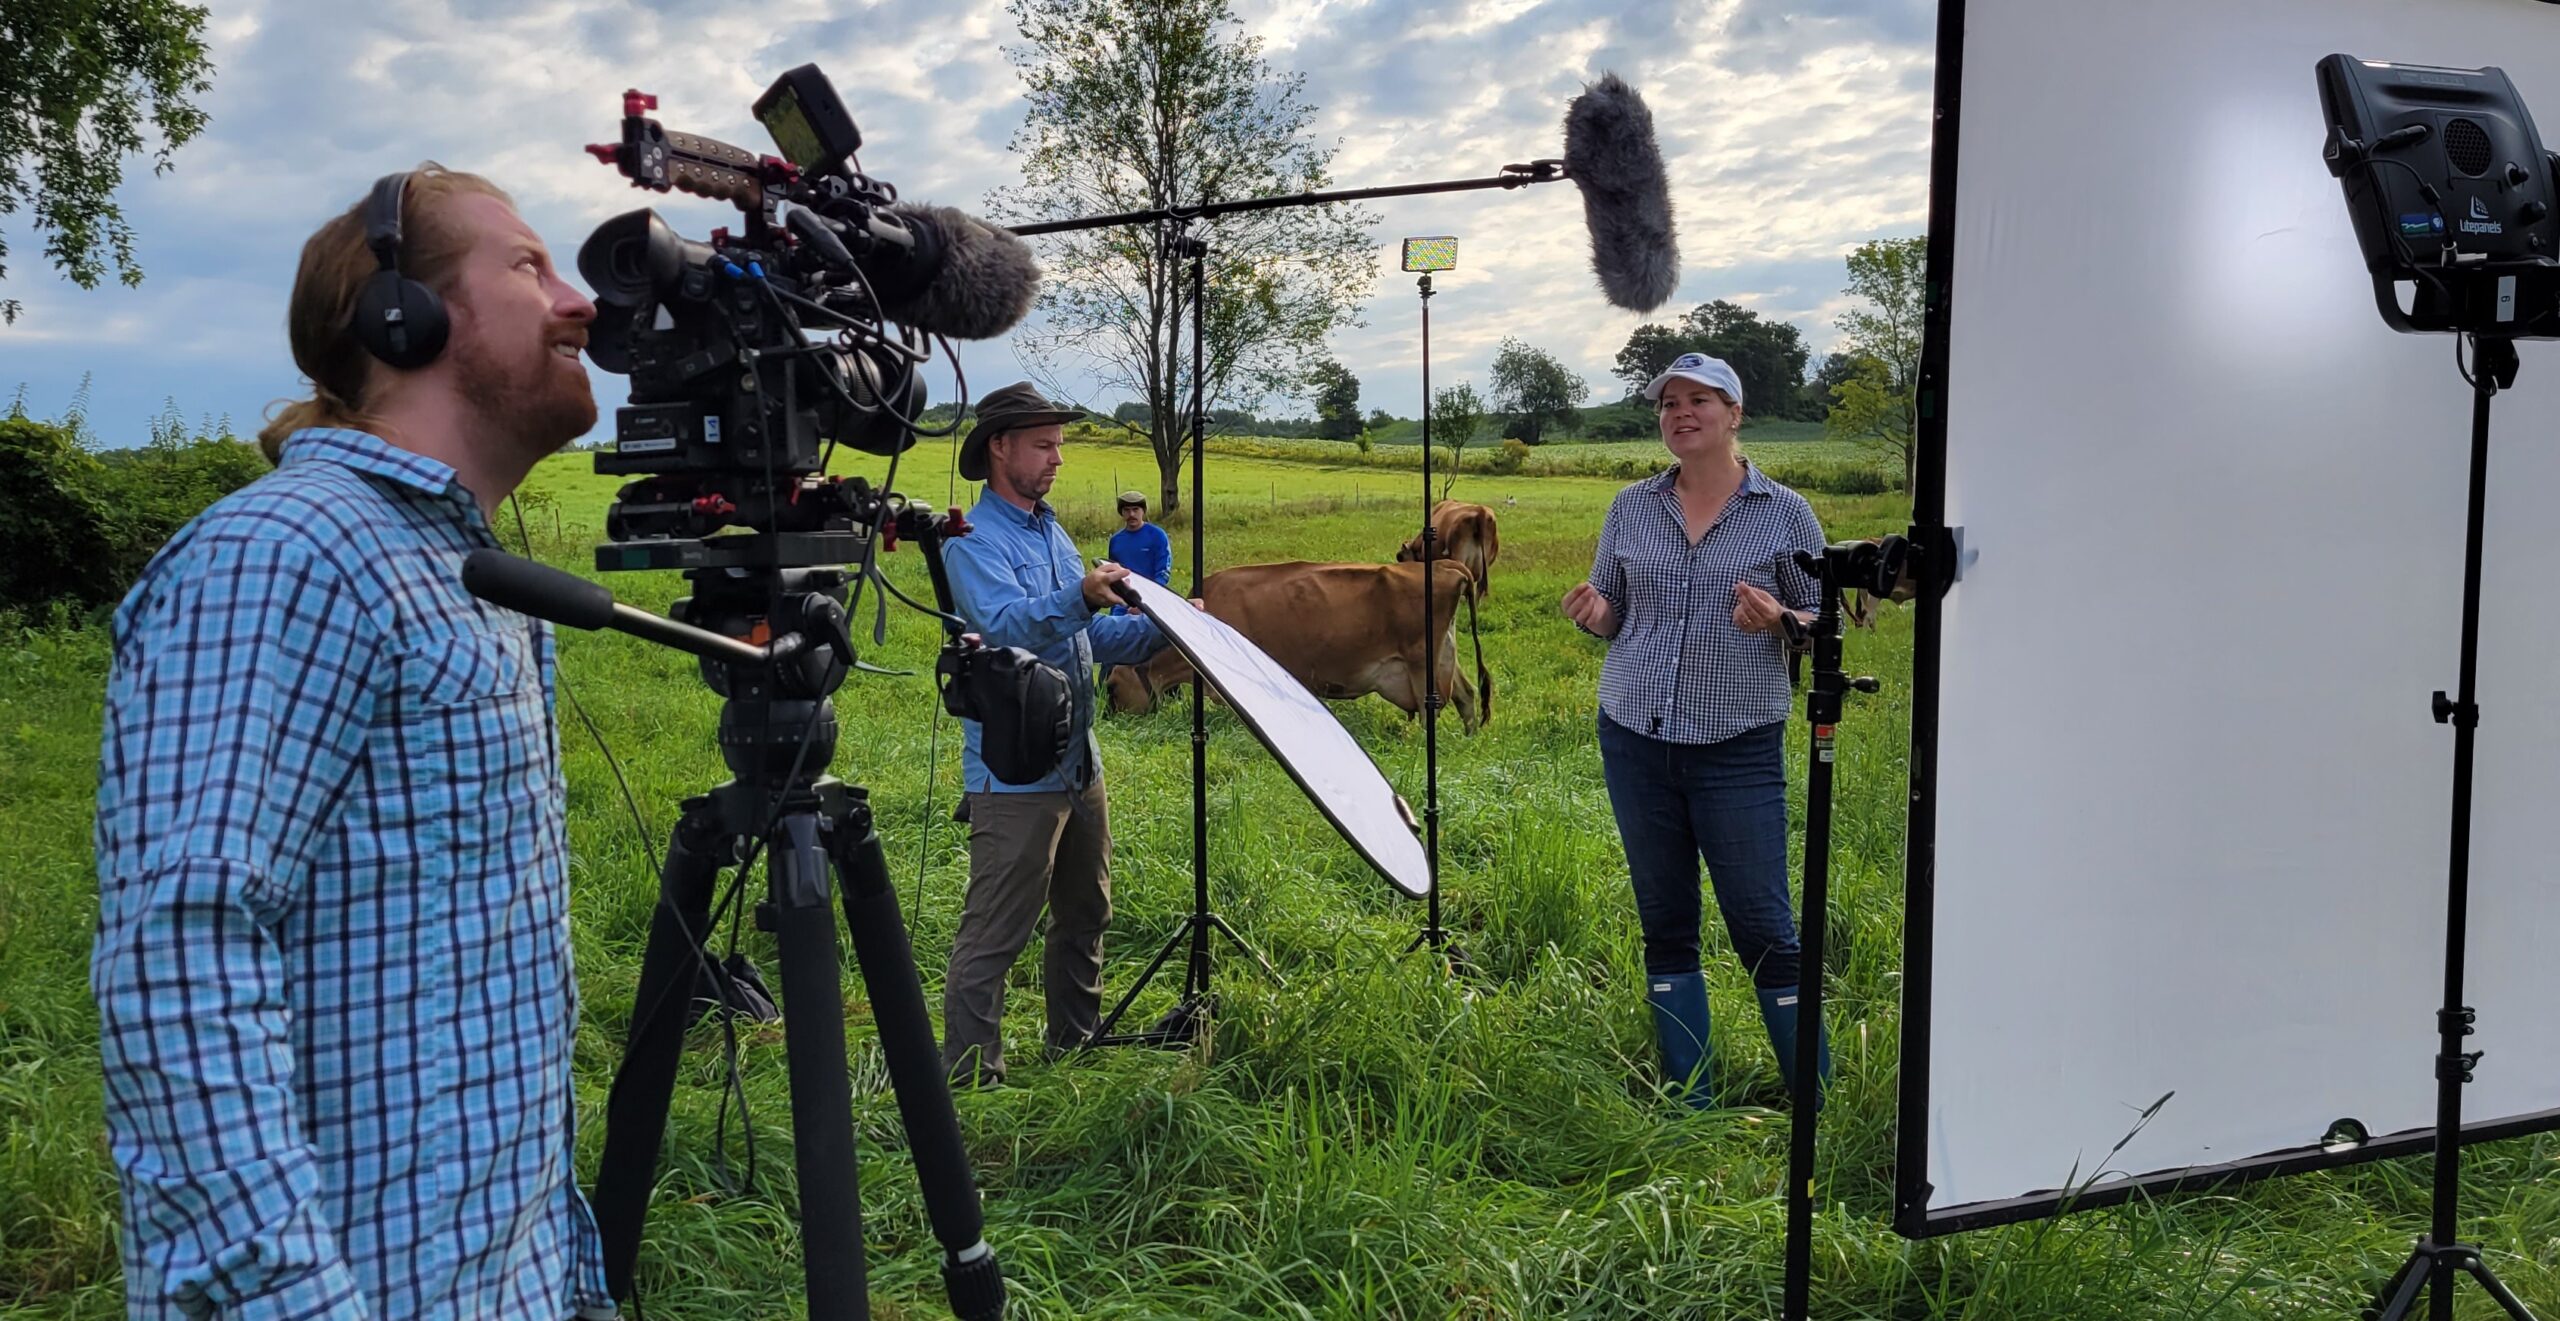 Behind the scenes at Inga's farm courtesy of Around the Farm Table.